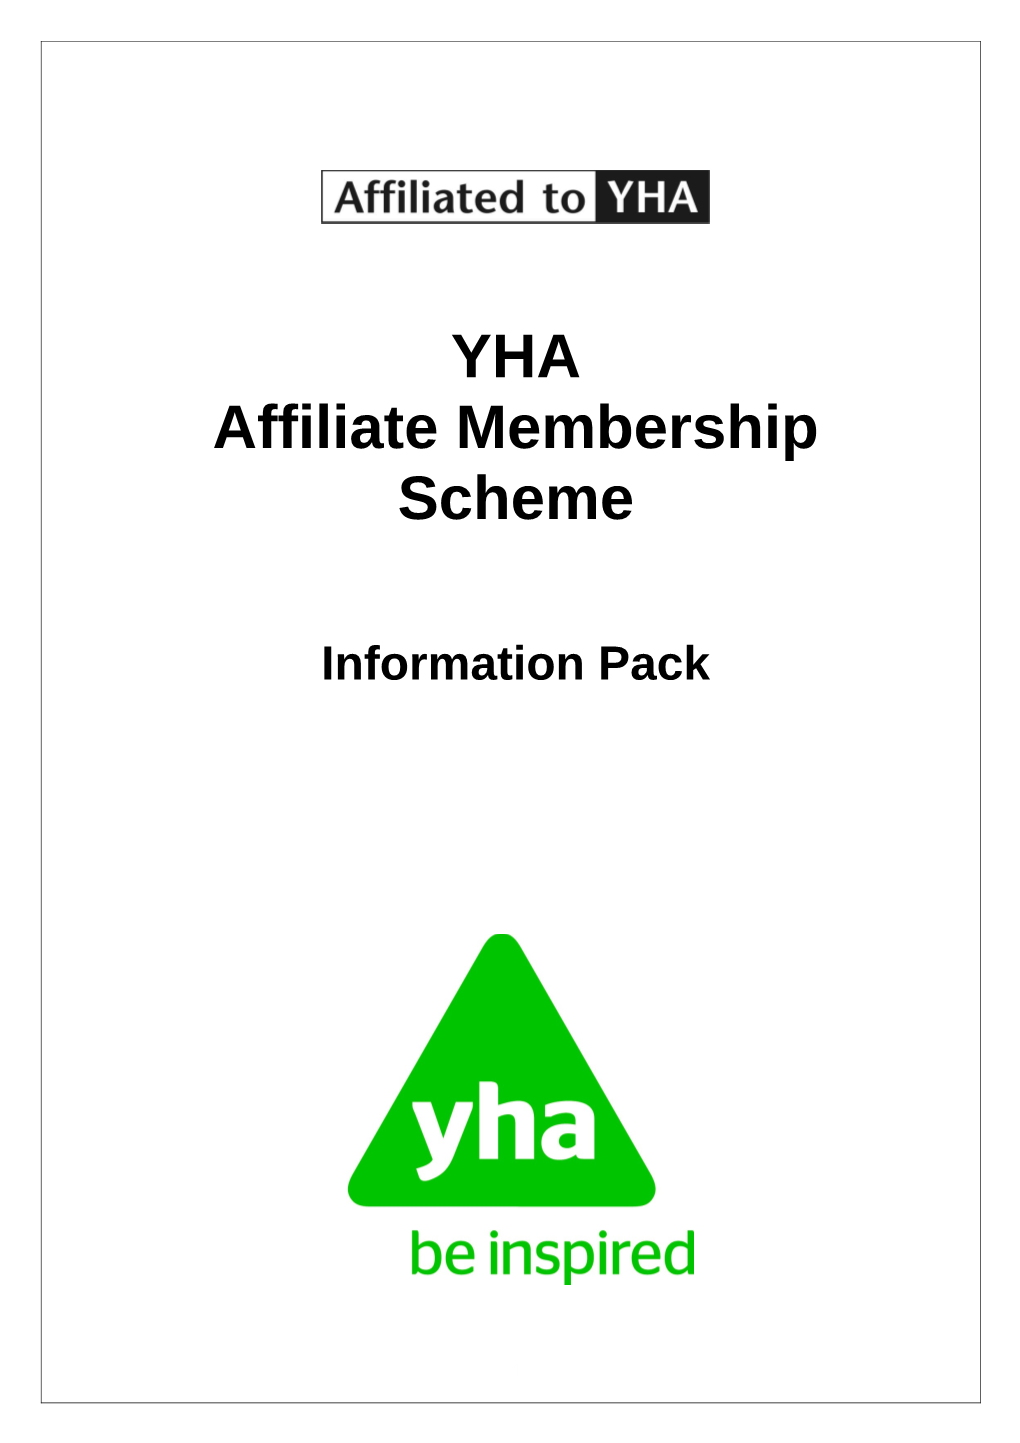 Welcome to YHA